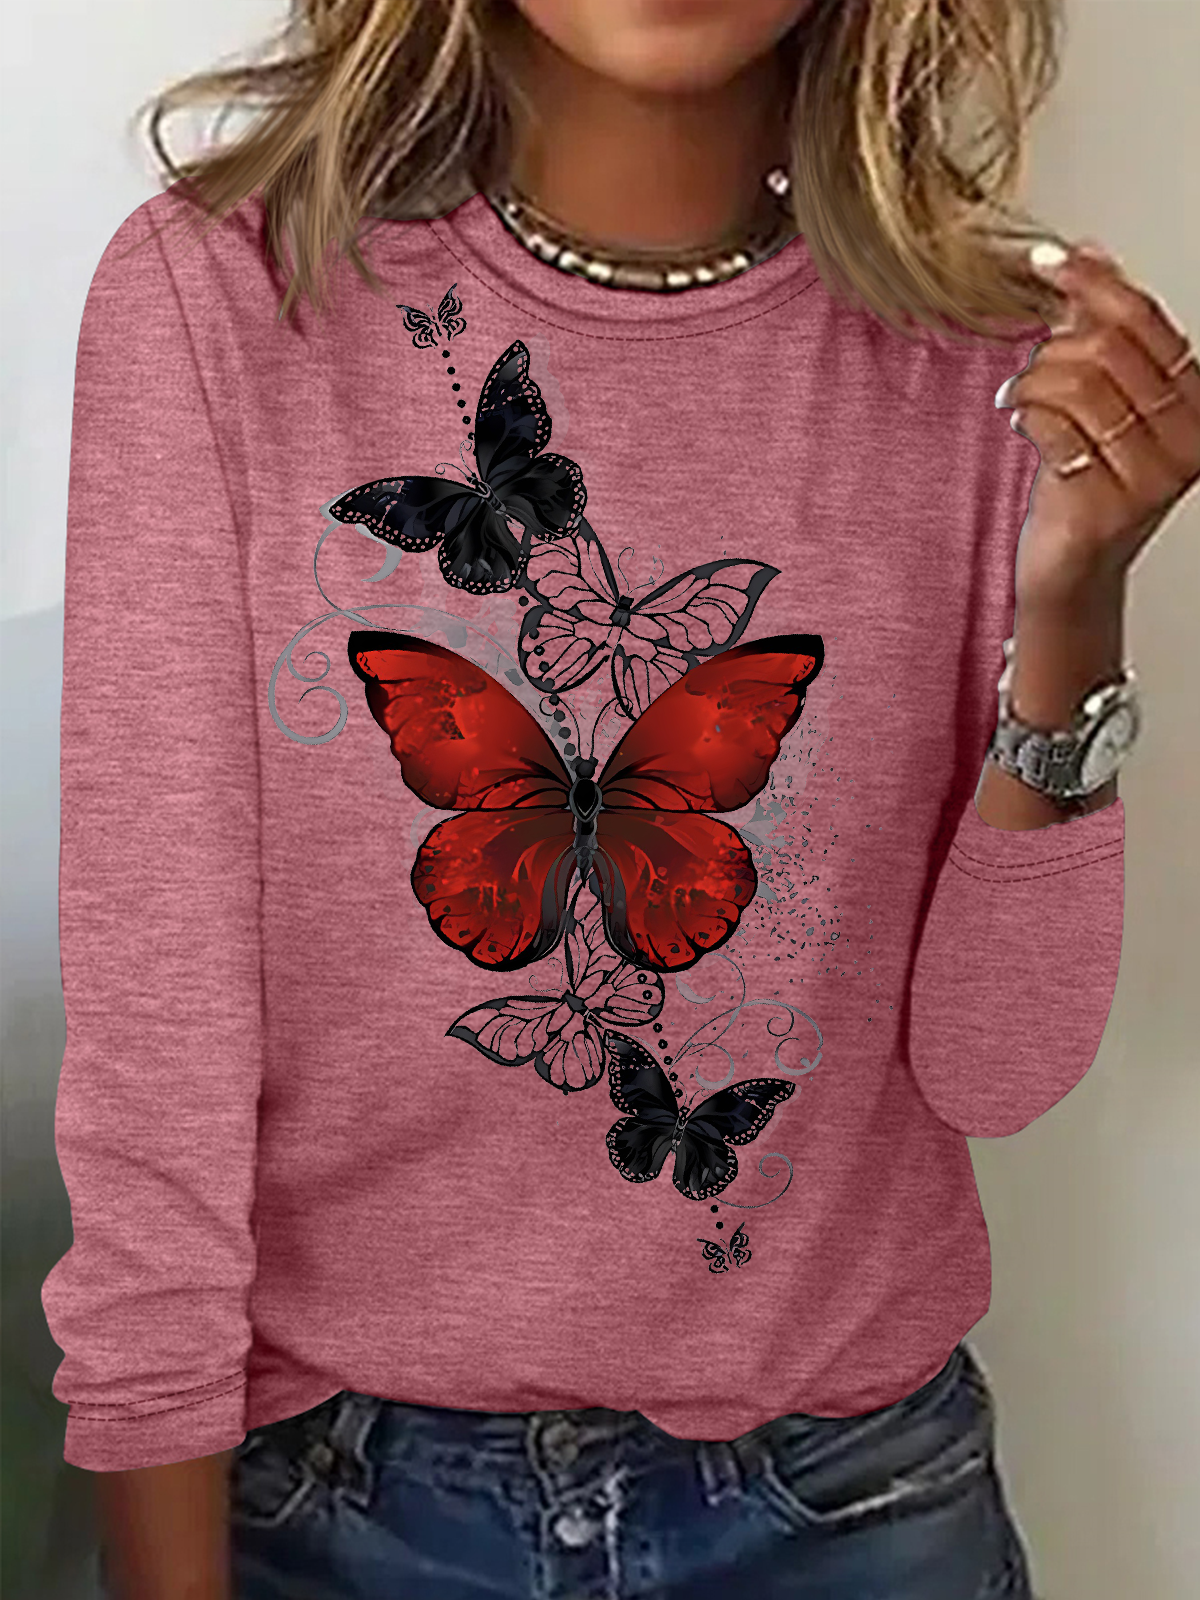 Women's Fashion Butterfly Graphic Printing Casual Regular Fit Top